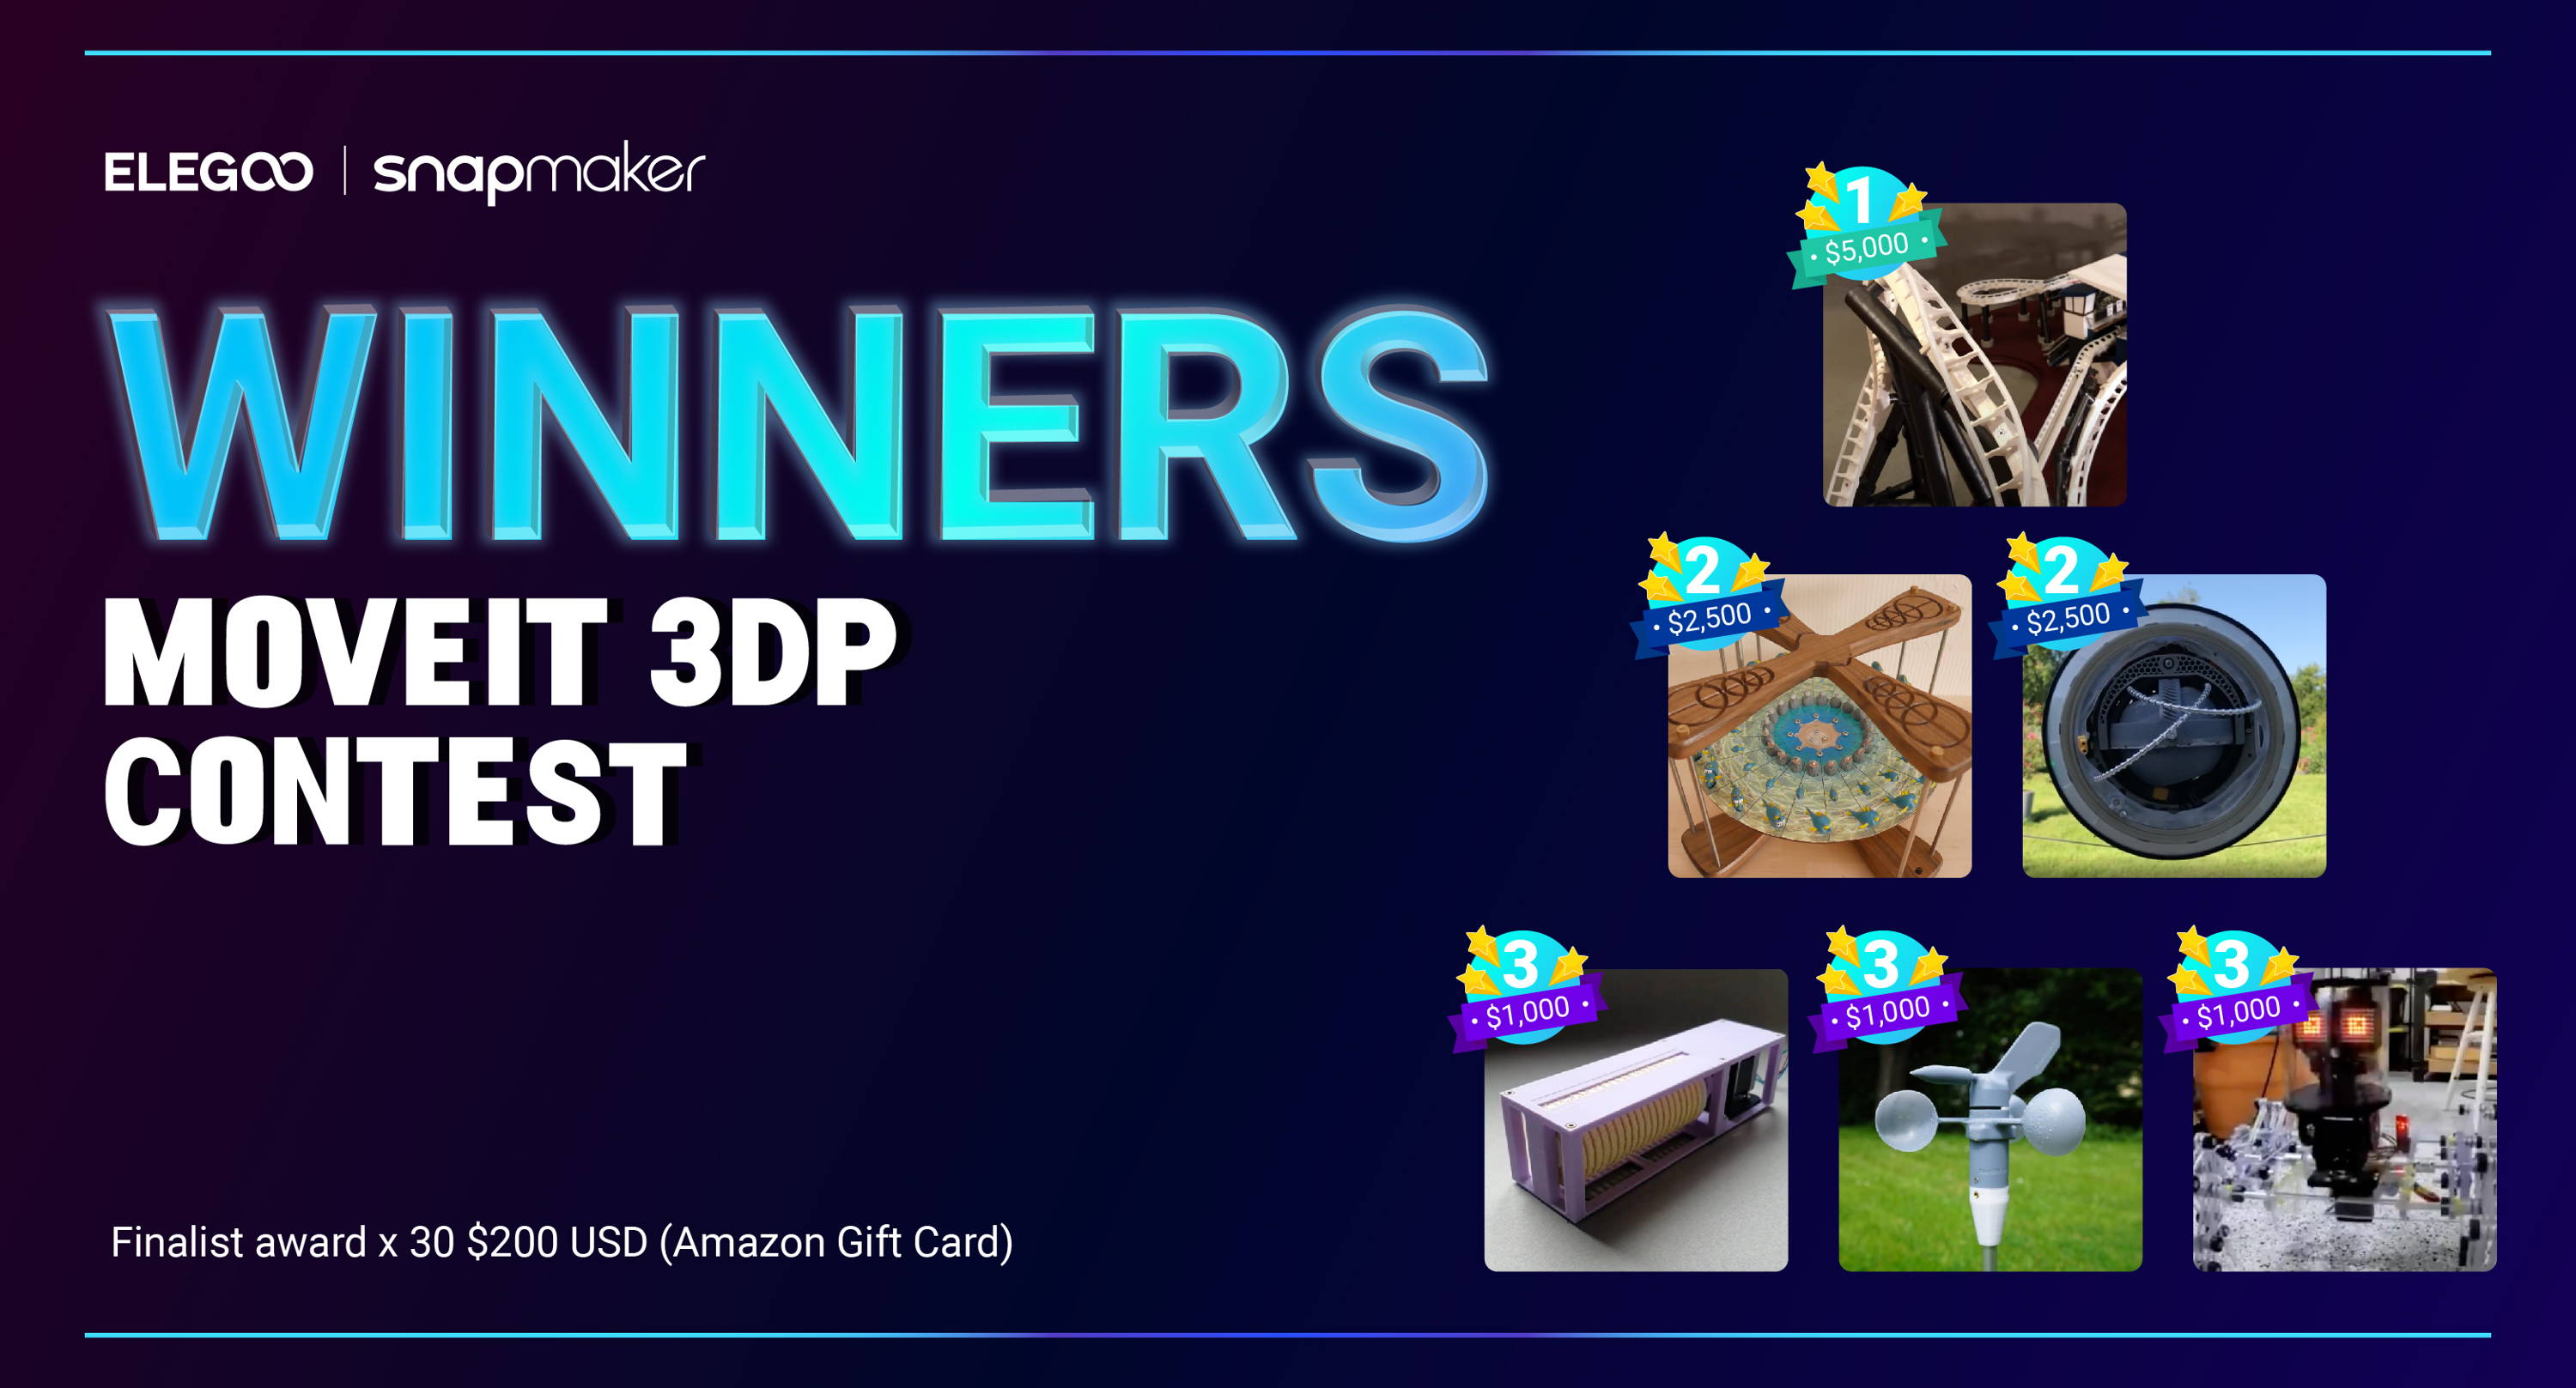 Announcing the Winners of the MOVEIT 3DP Contest!